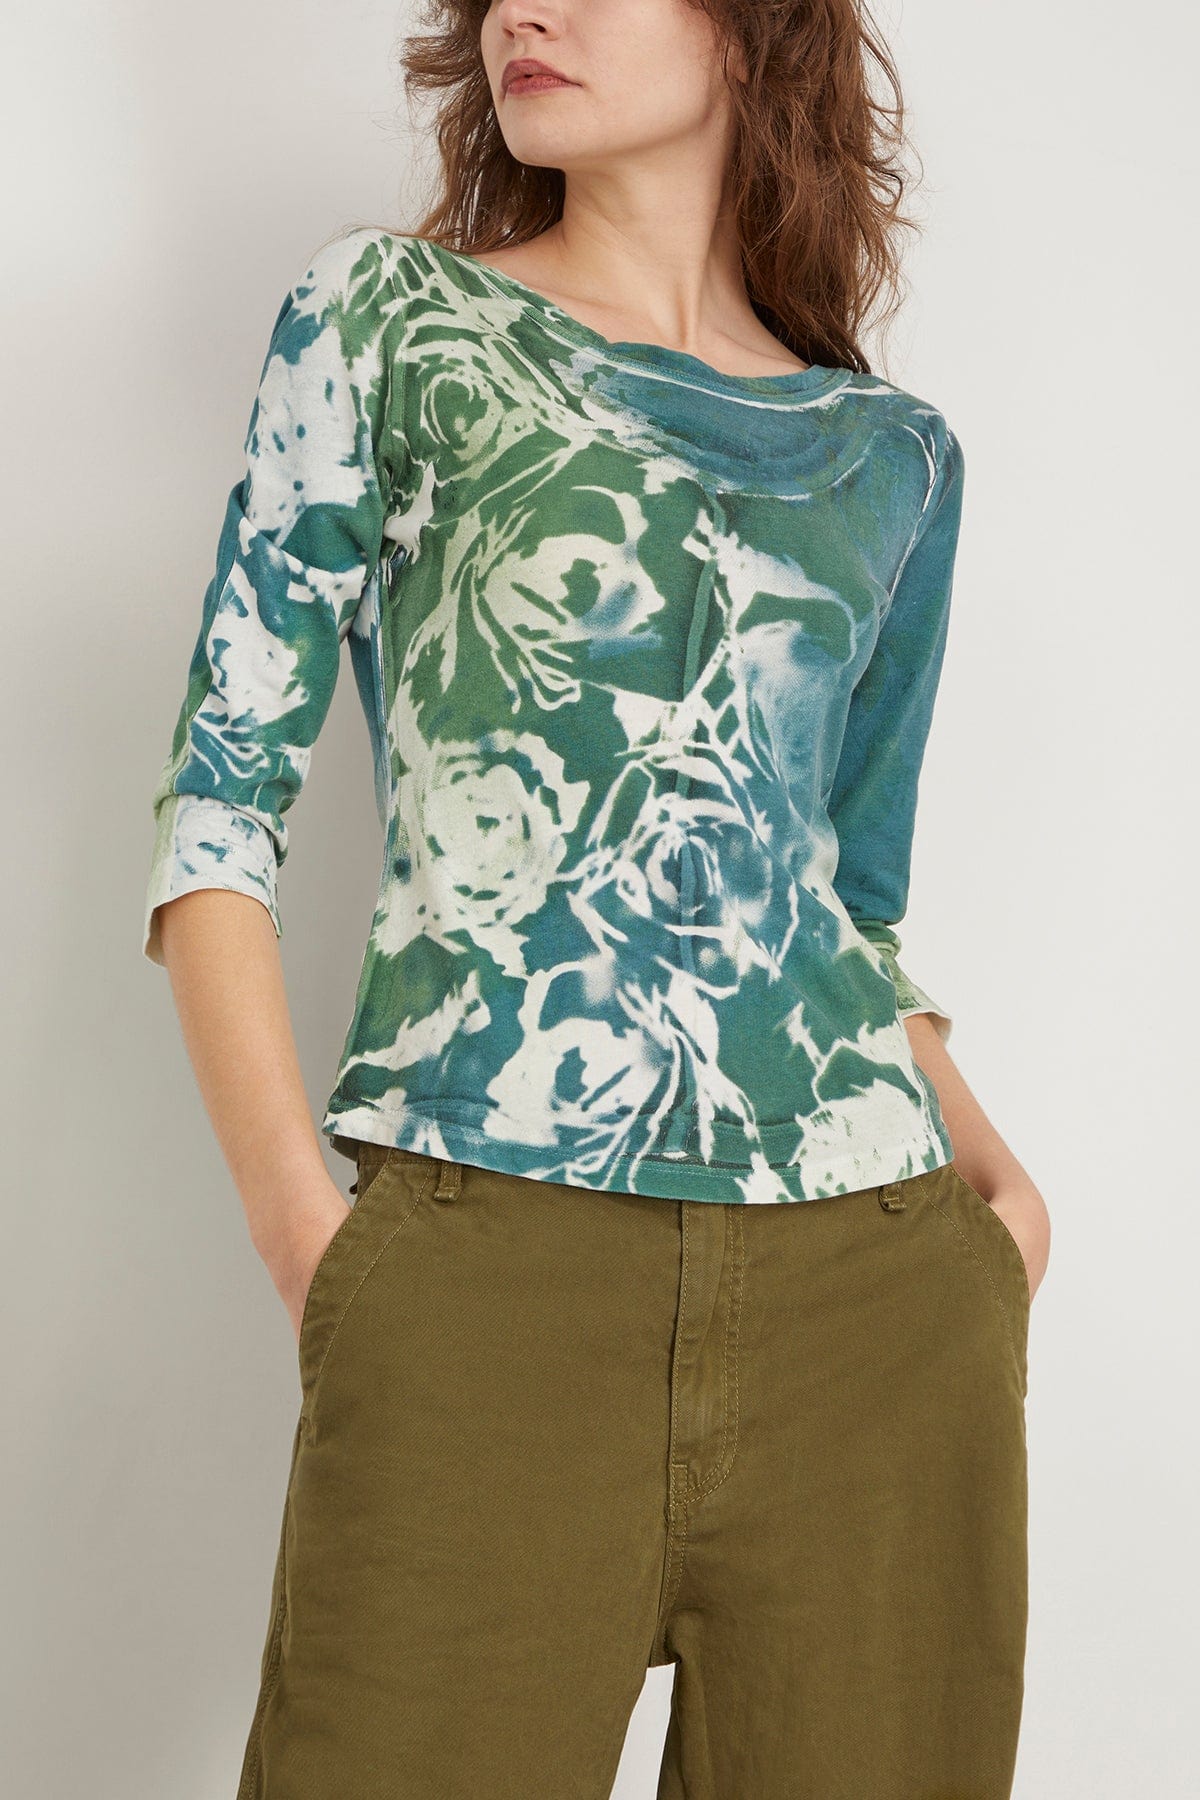 Raquel Allegra Tops Bryony Top in Teal Army Rose Raquel Allegra Bryony Top in Teal Army Rose